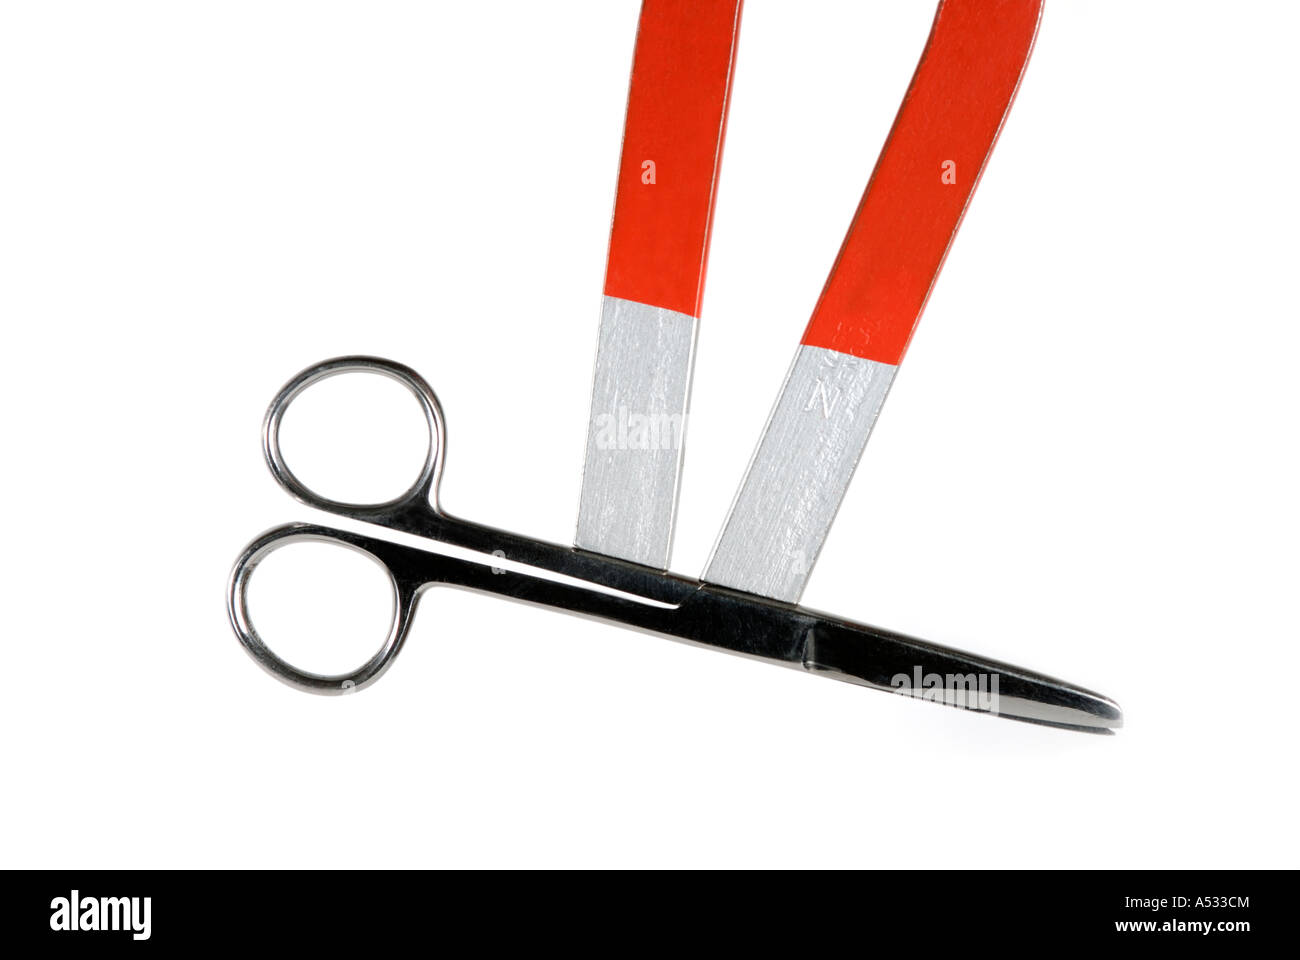 Horseshoe shaped two pole magnet with scissors attached Stock Photo